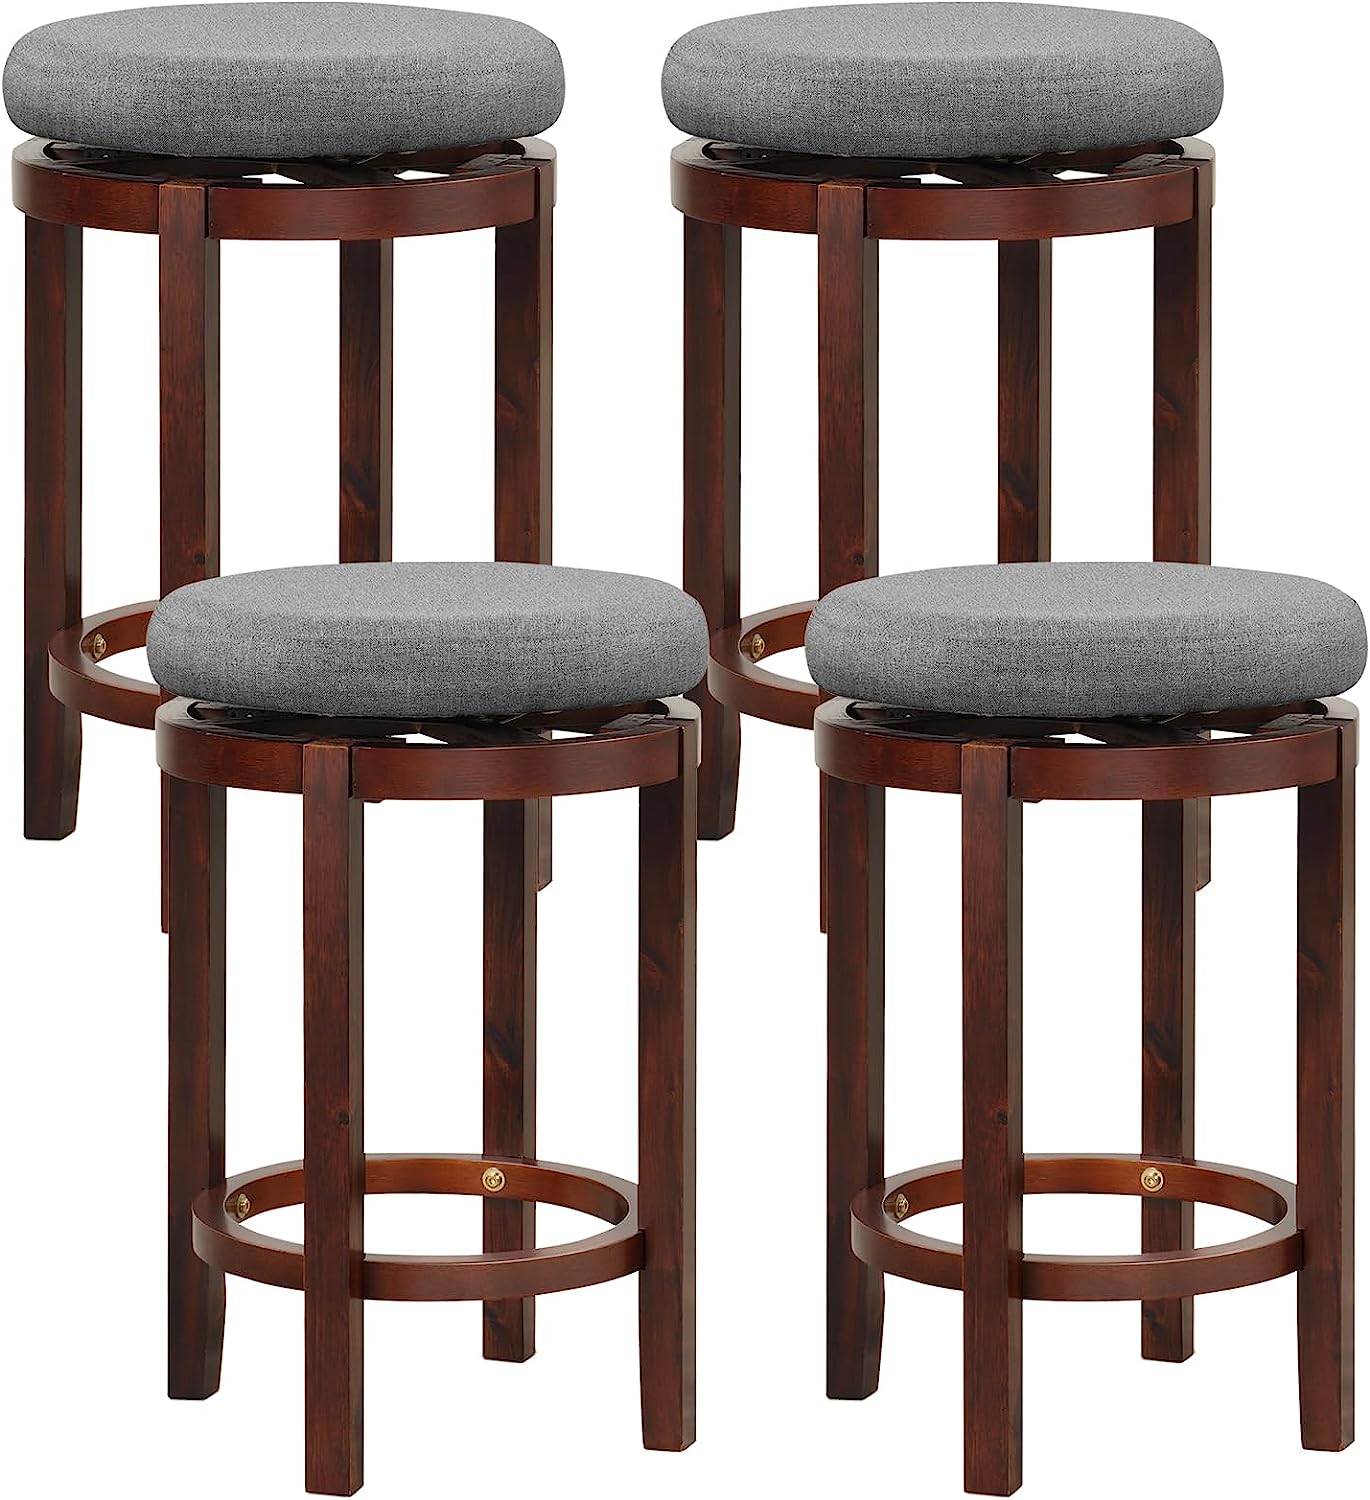 Giantex Counter Height Stool Set of 2, 26 Inch Swivel Bar Stool with Padded Cushion & Rubber Wood Legs